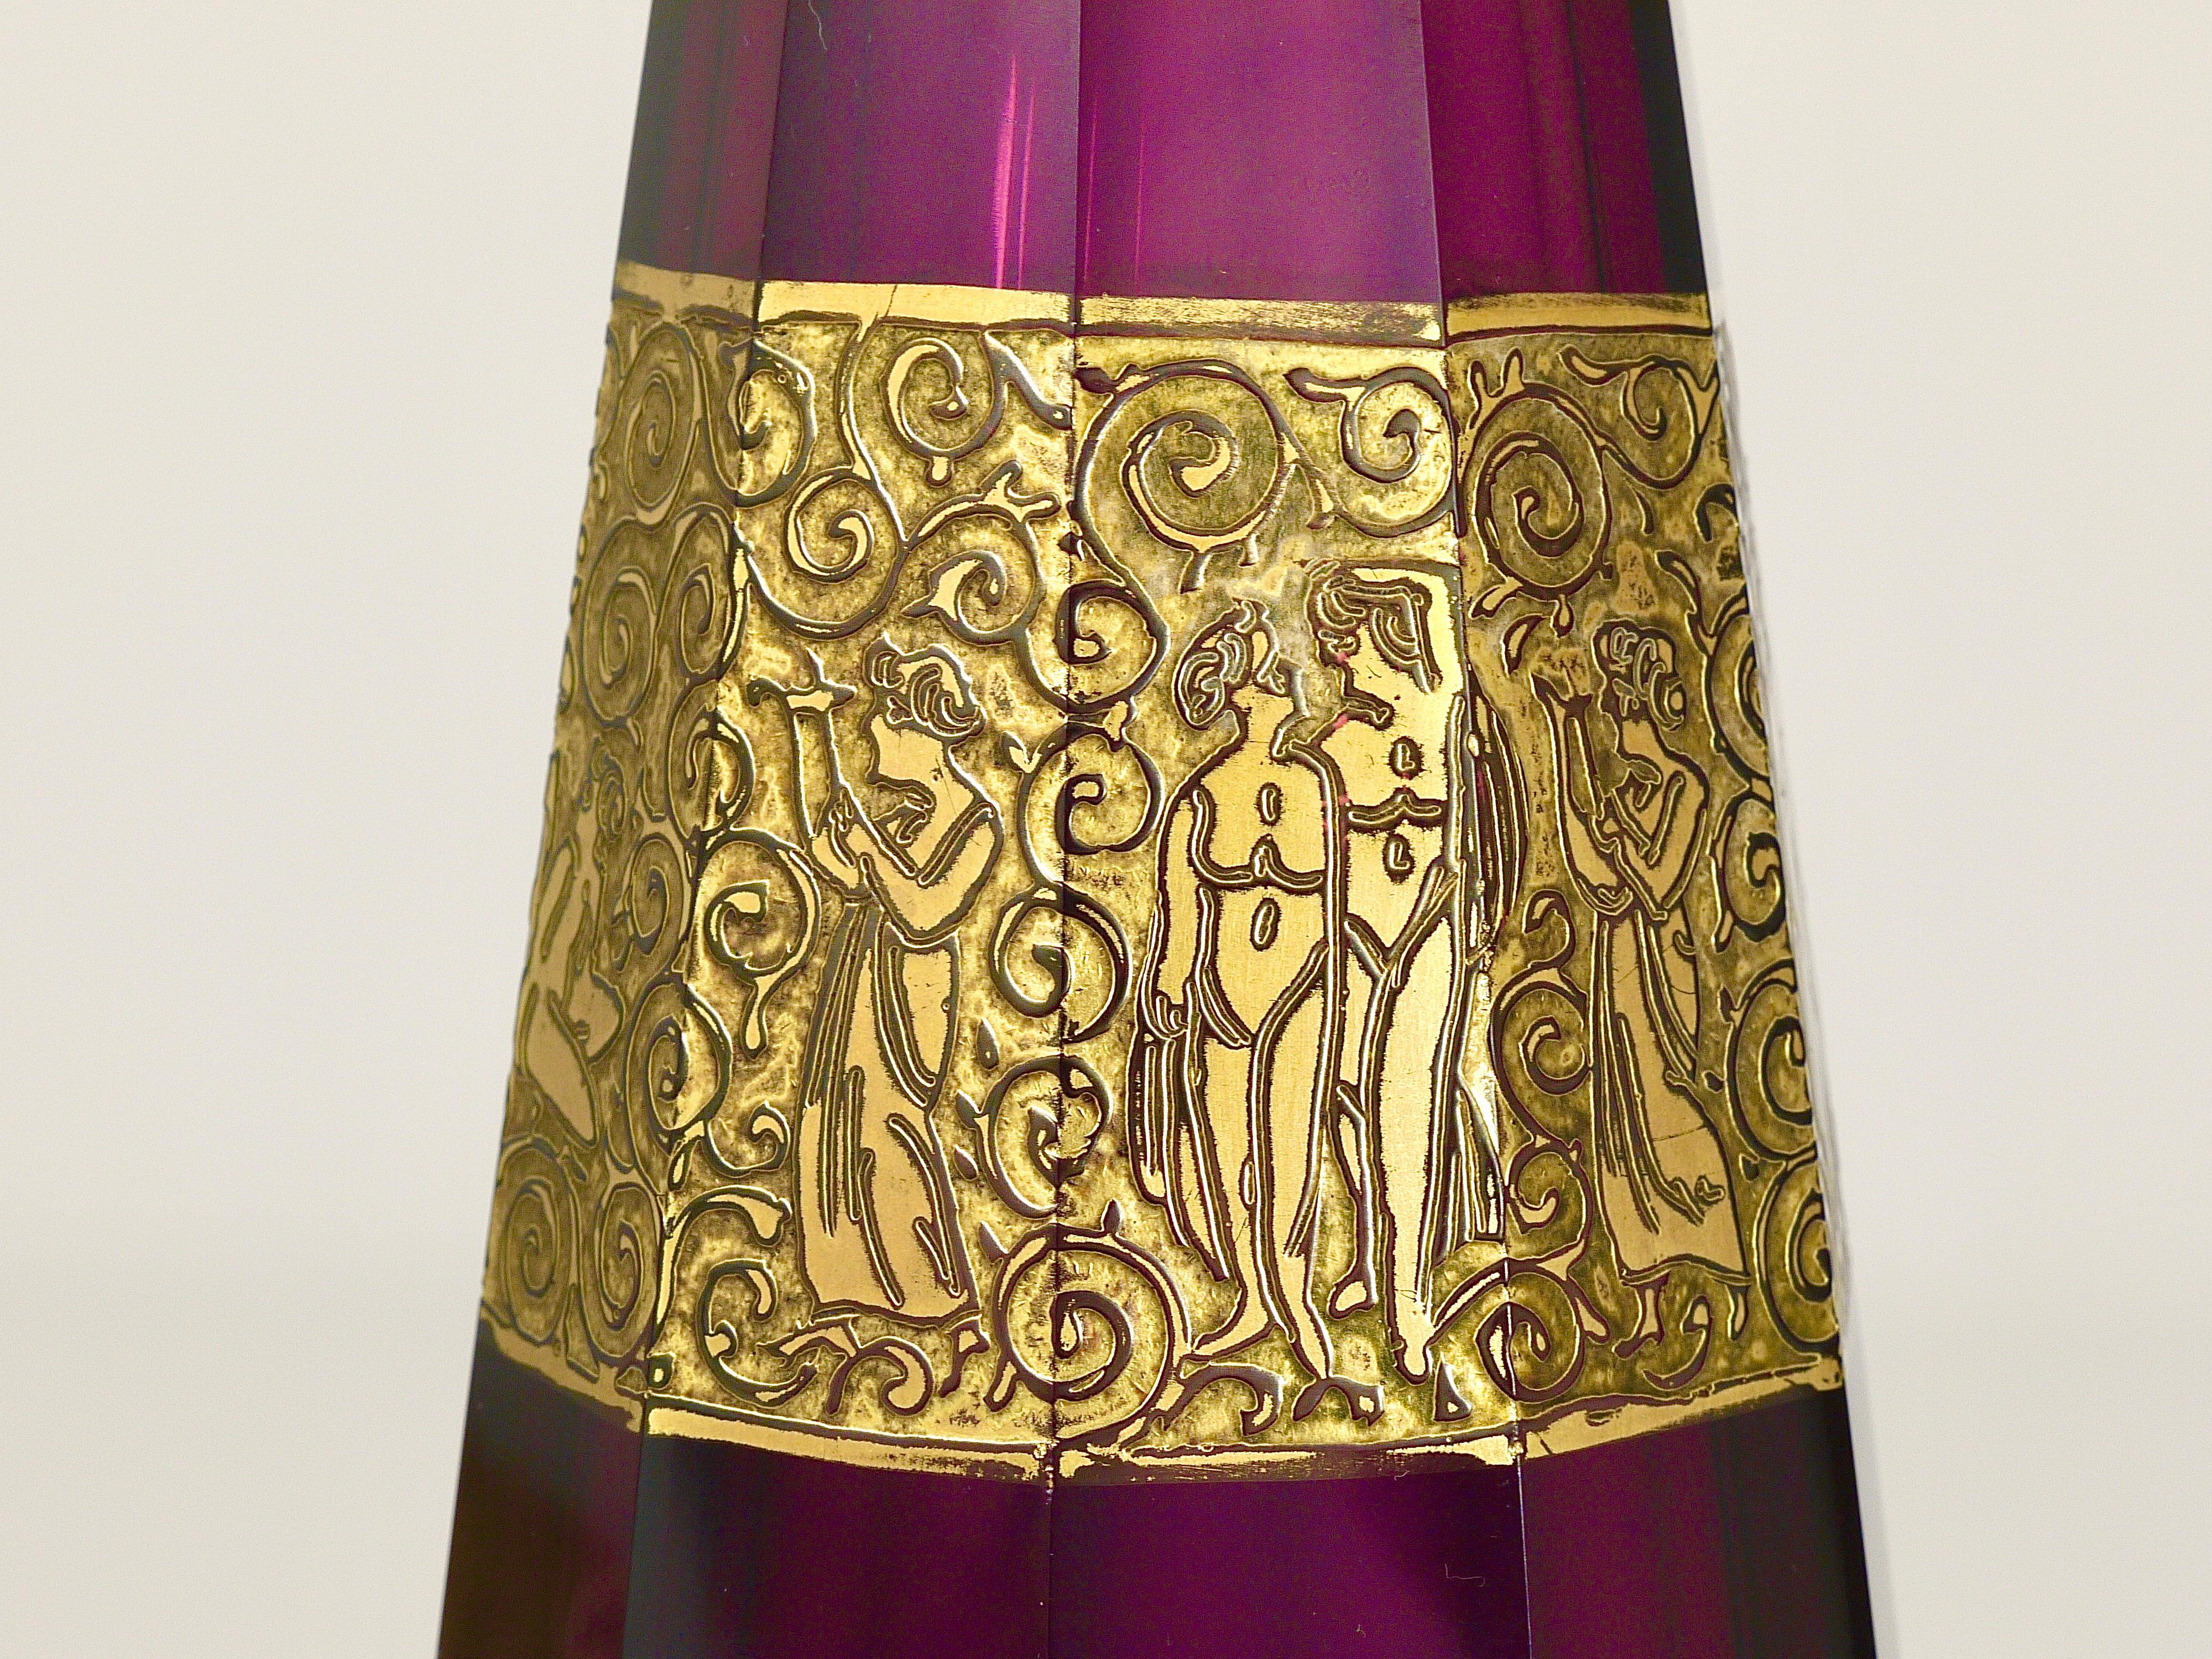 A beautiful and decorative hand blown Art Deco crystal glass vase with lovely golden pattern. Dated circa 1920, manufactured by Ludwig Moser Glassworks Karlsbad in Czechoslovakia. Made of facetted purple crystal cut glass. In very good condition.